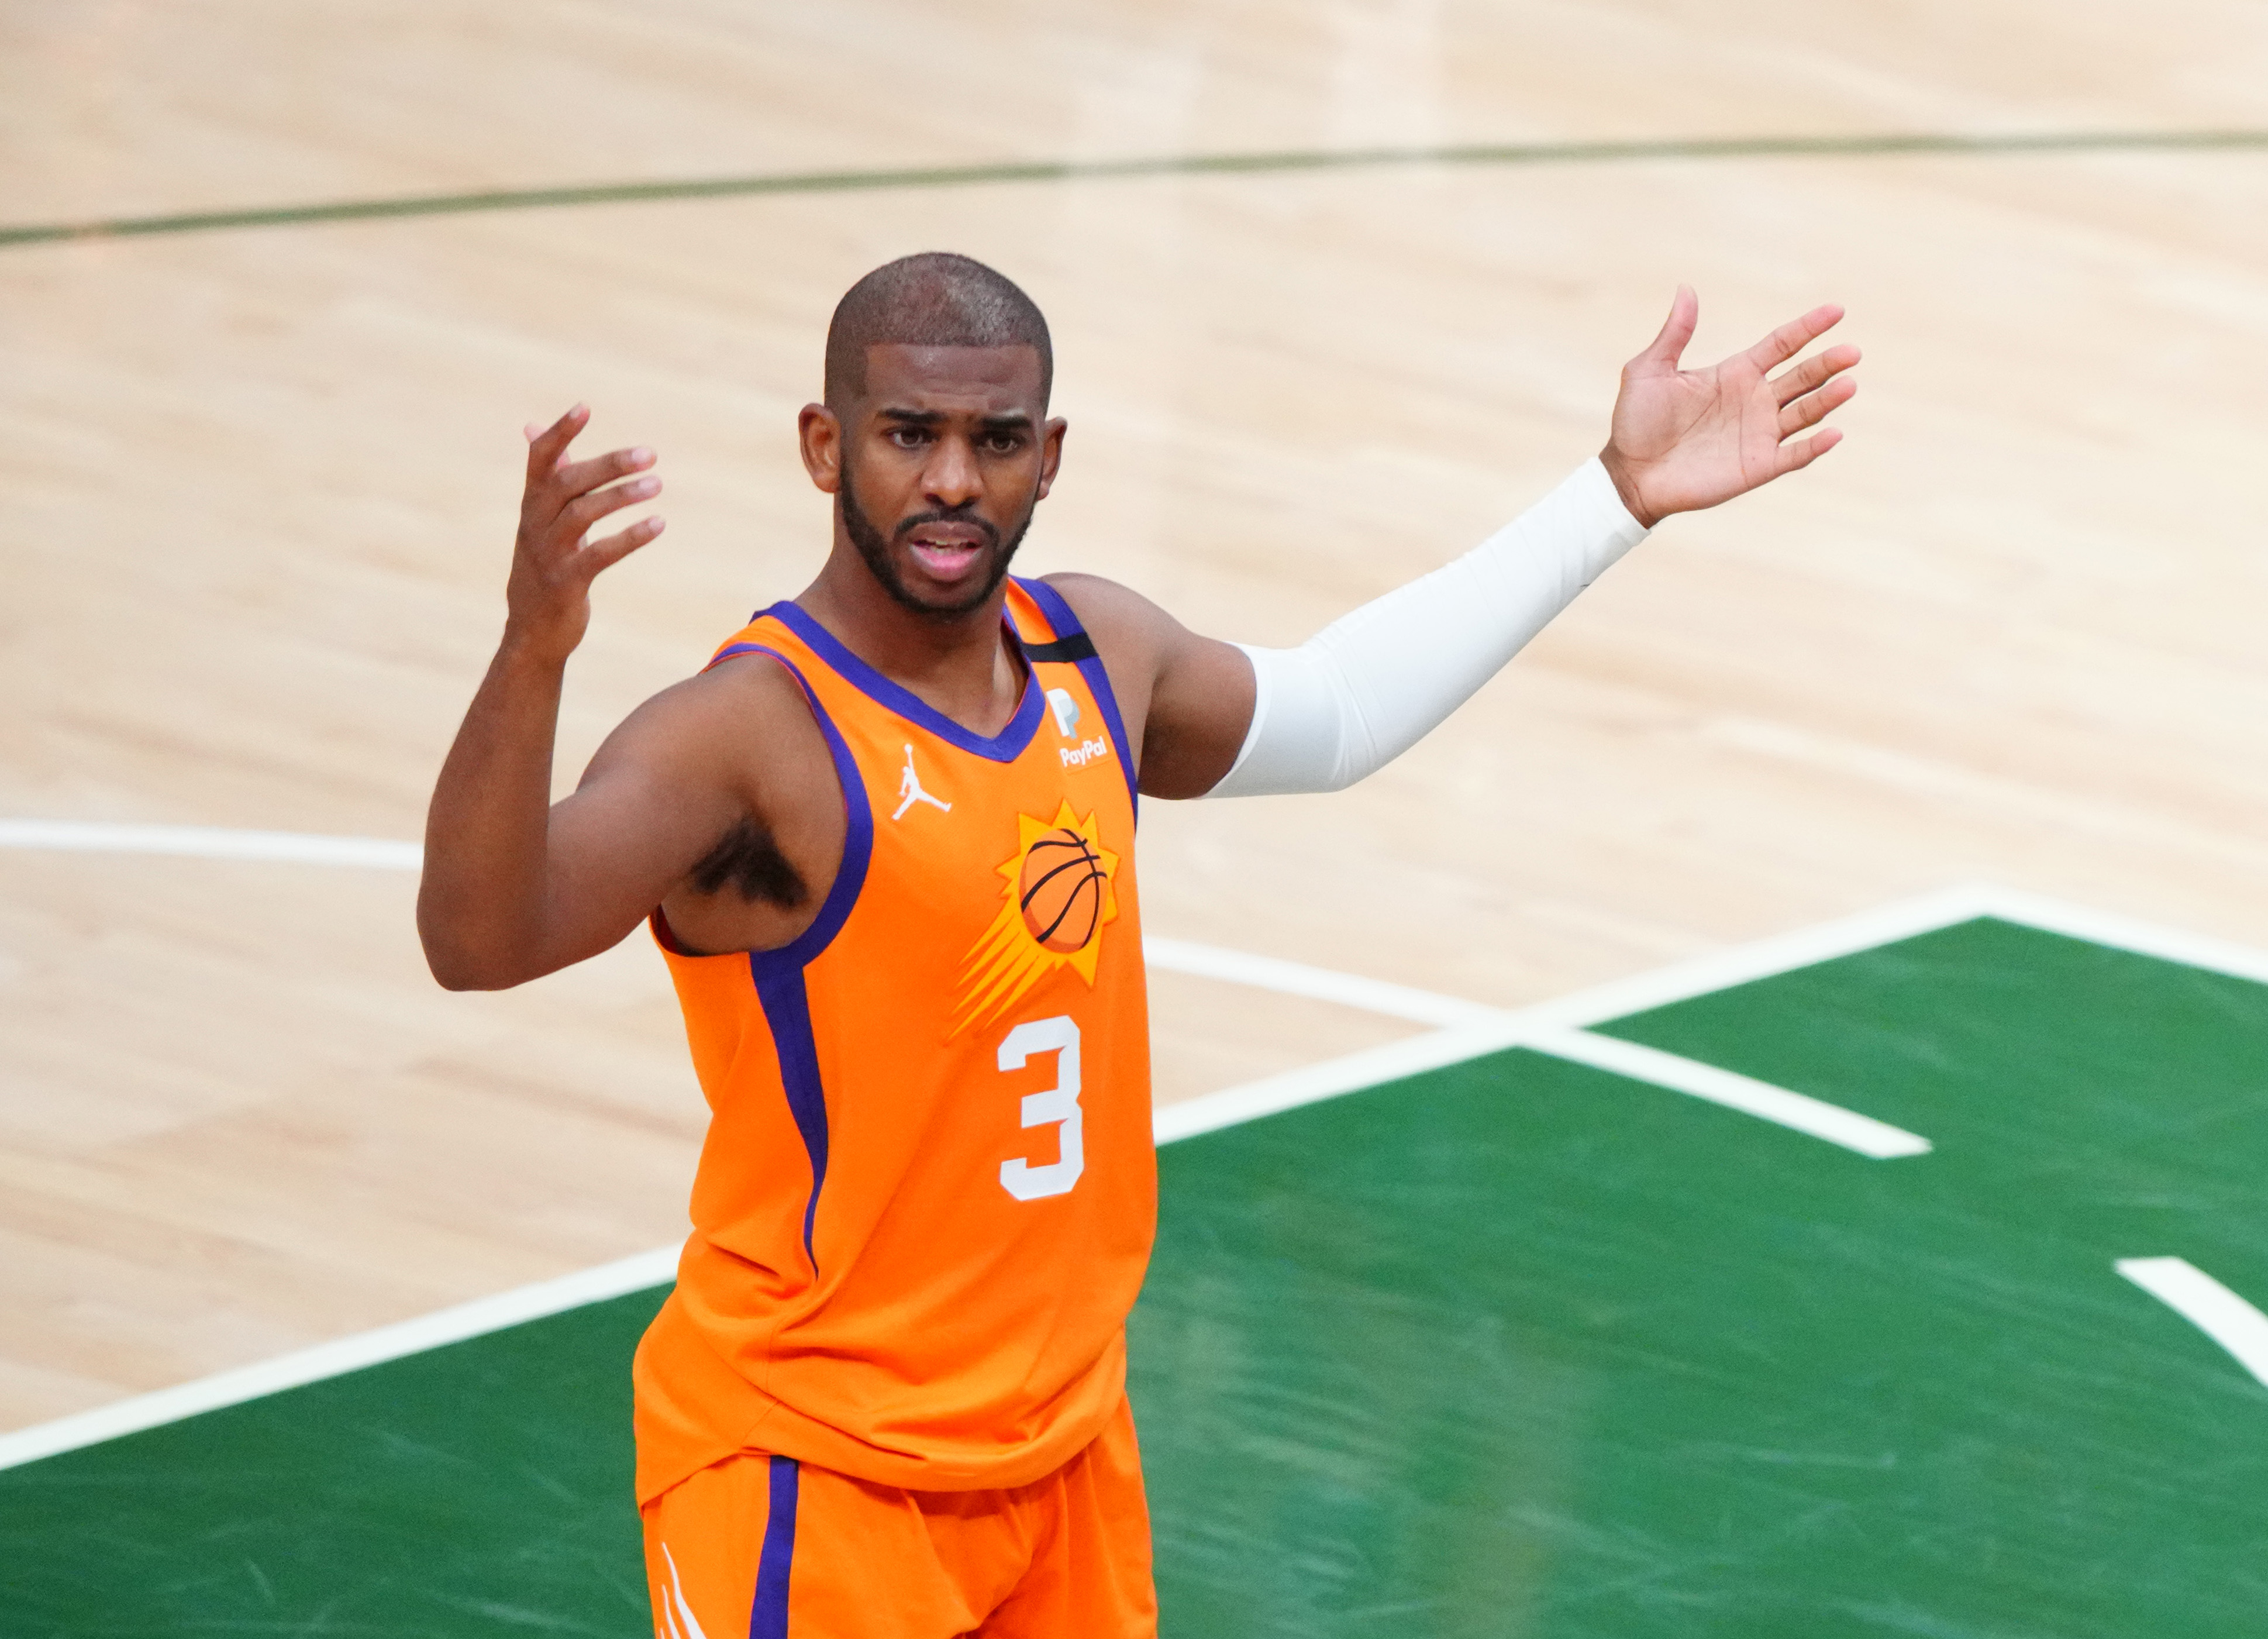 NBA reveals 2021-22 City Edition jerseys; Suns stick with Valley option